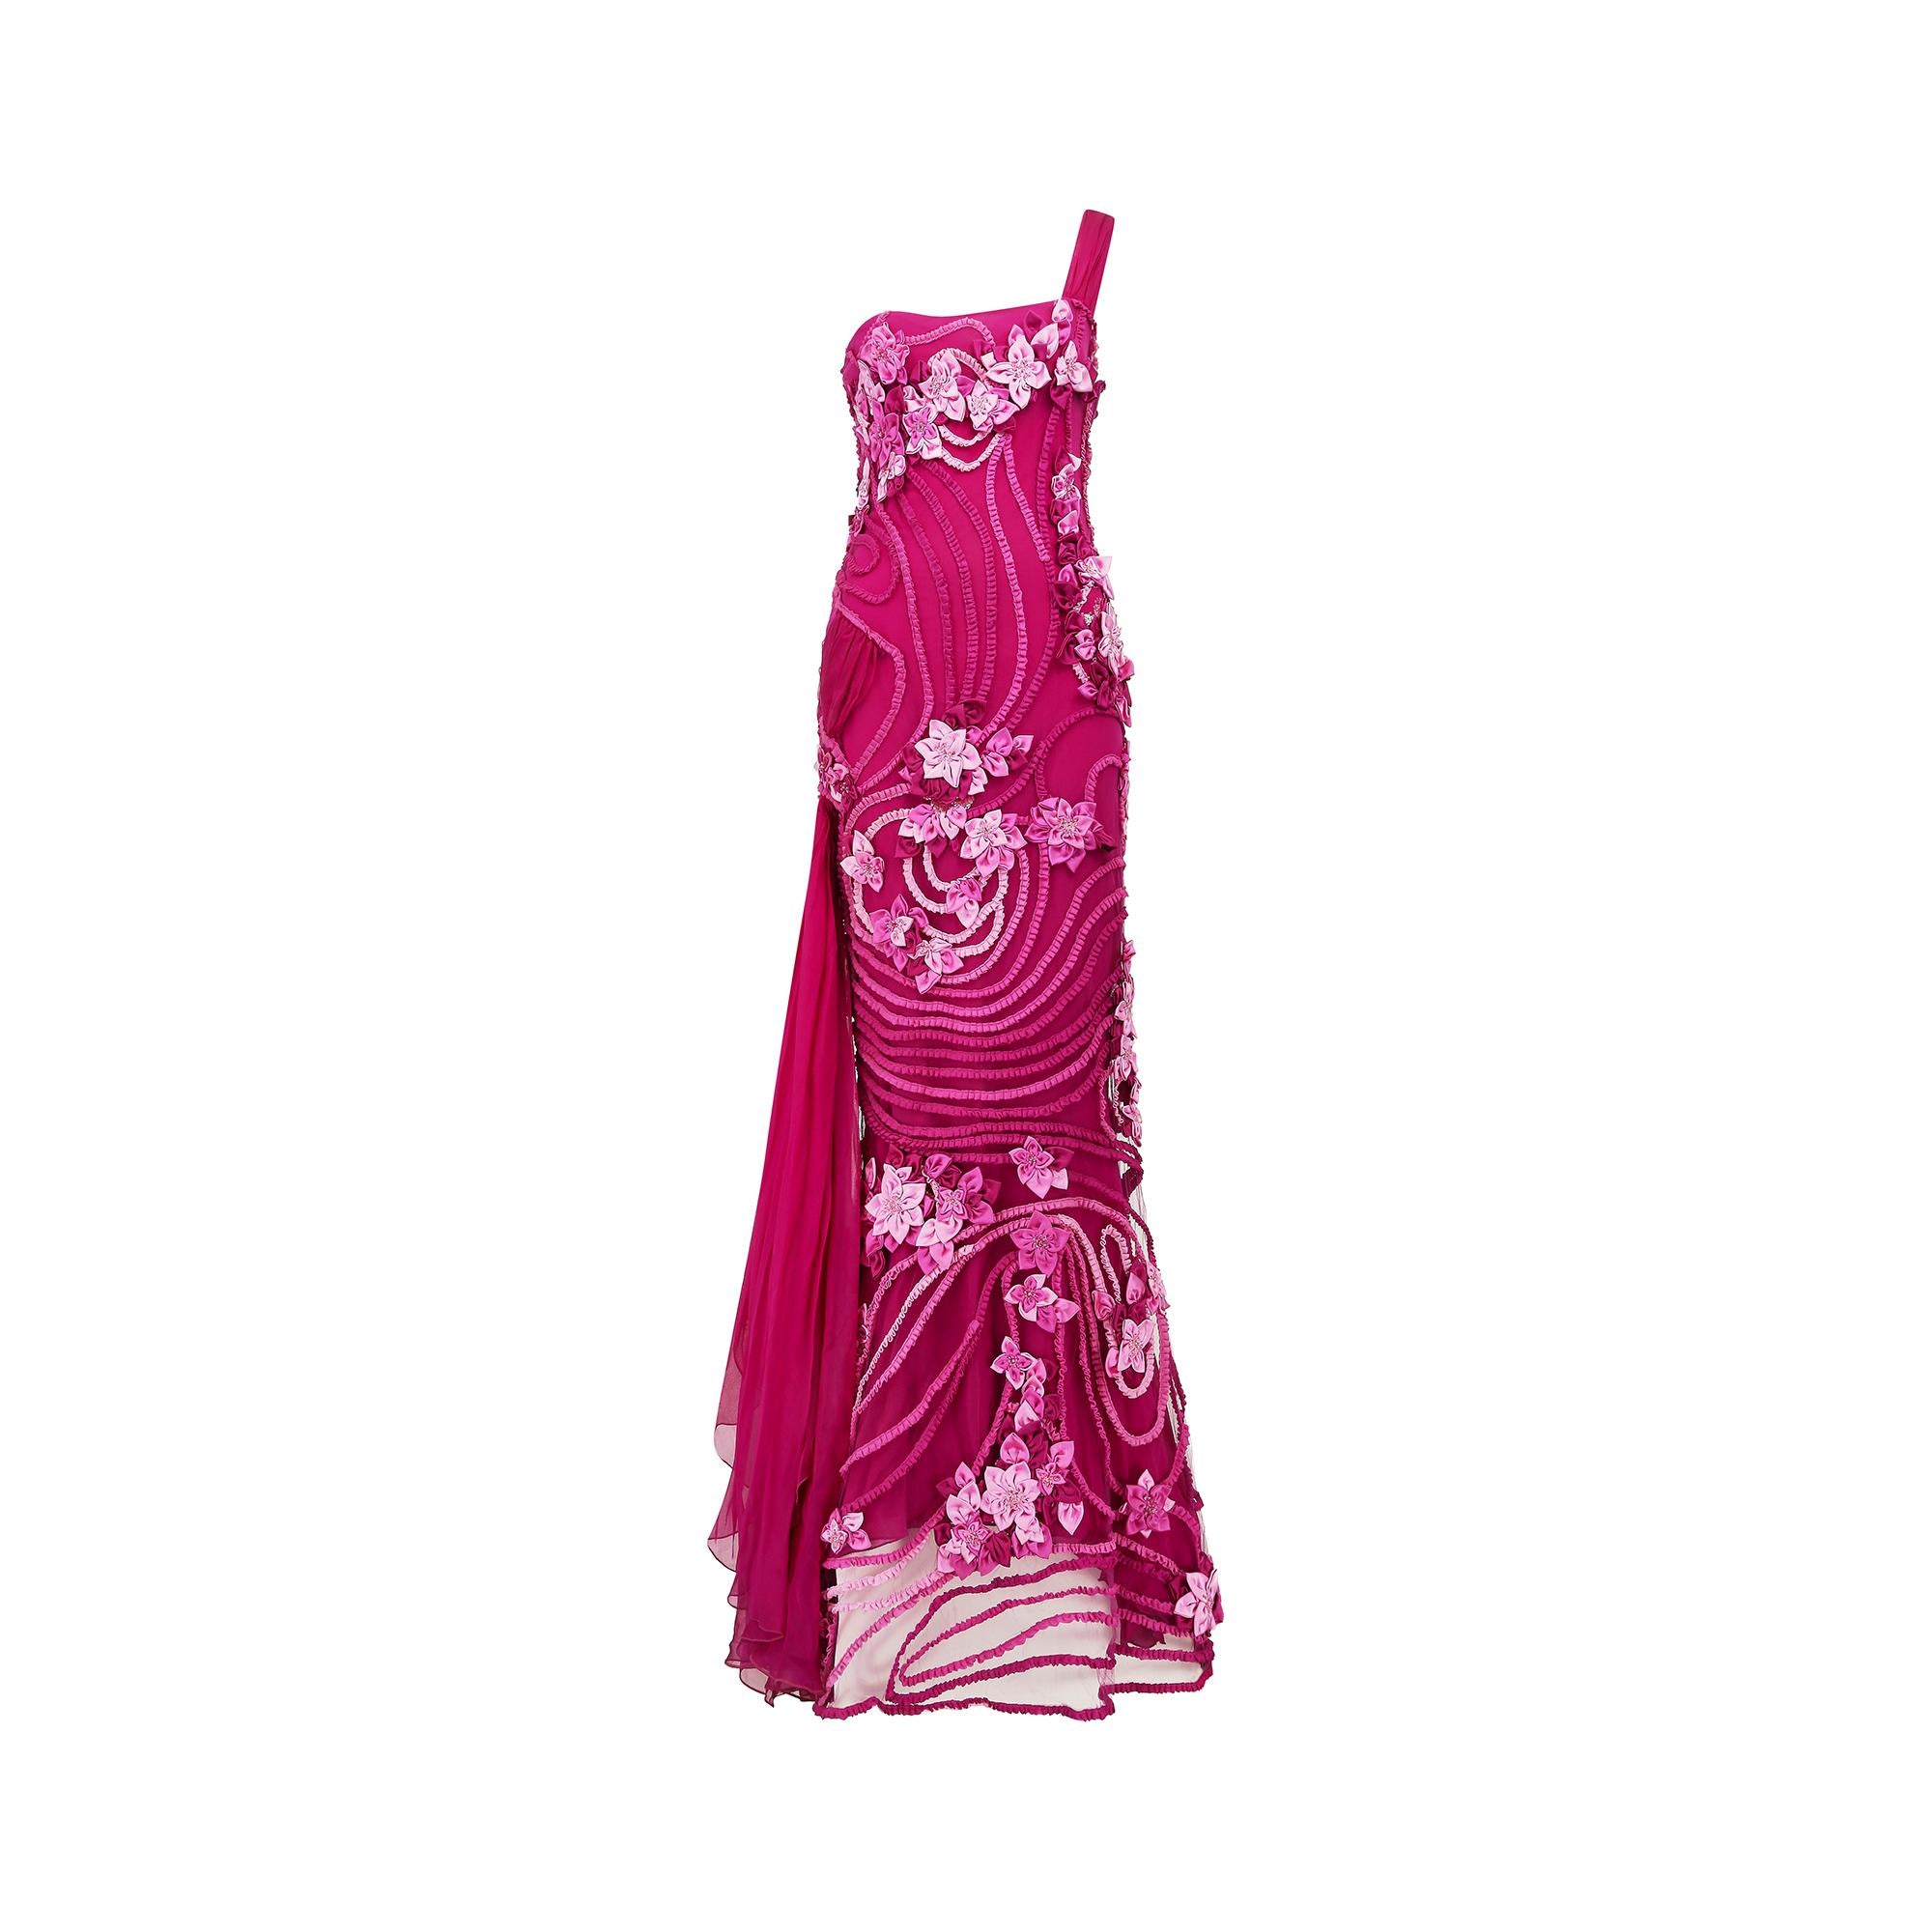 This is an exceptional Y2K Valentino Garavani dress, probably Cruise Collection 2000, when the eponymous designer himself was the creative director. It is a lavish concoction of cerise pink ribbon work and has an asymmetric left hand silk chiffon